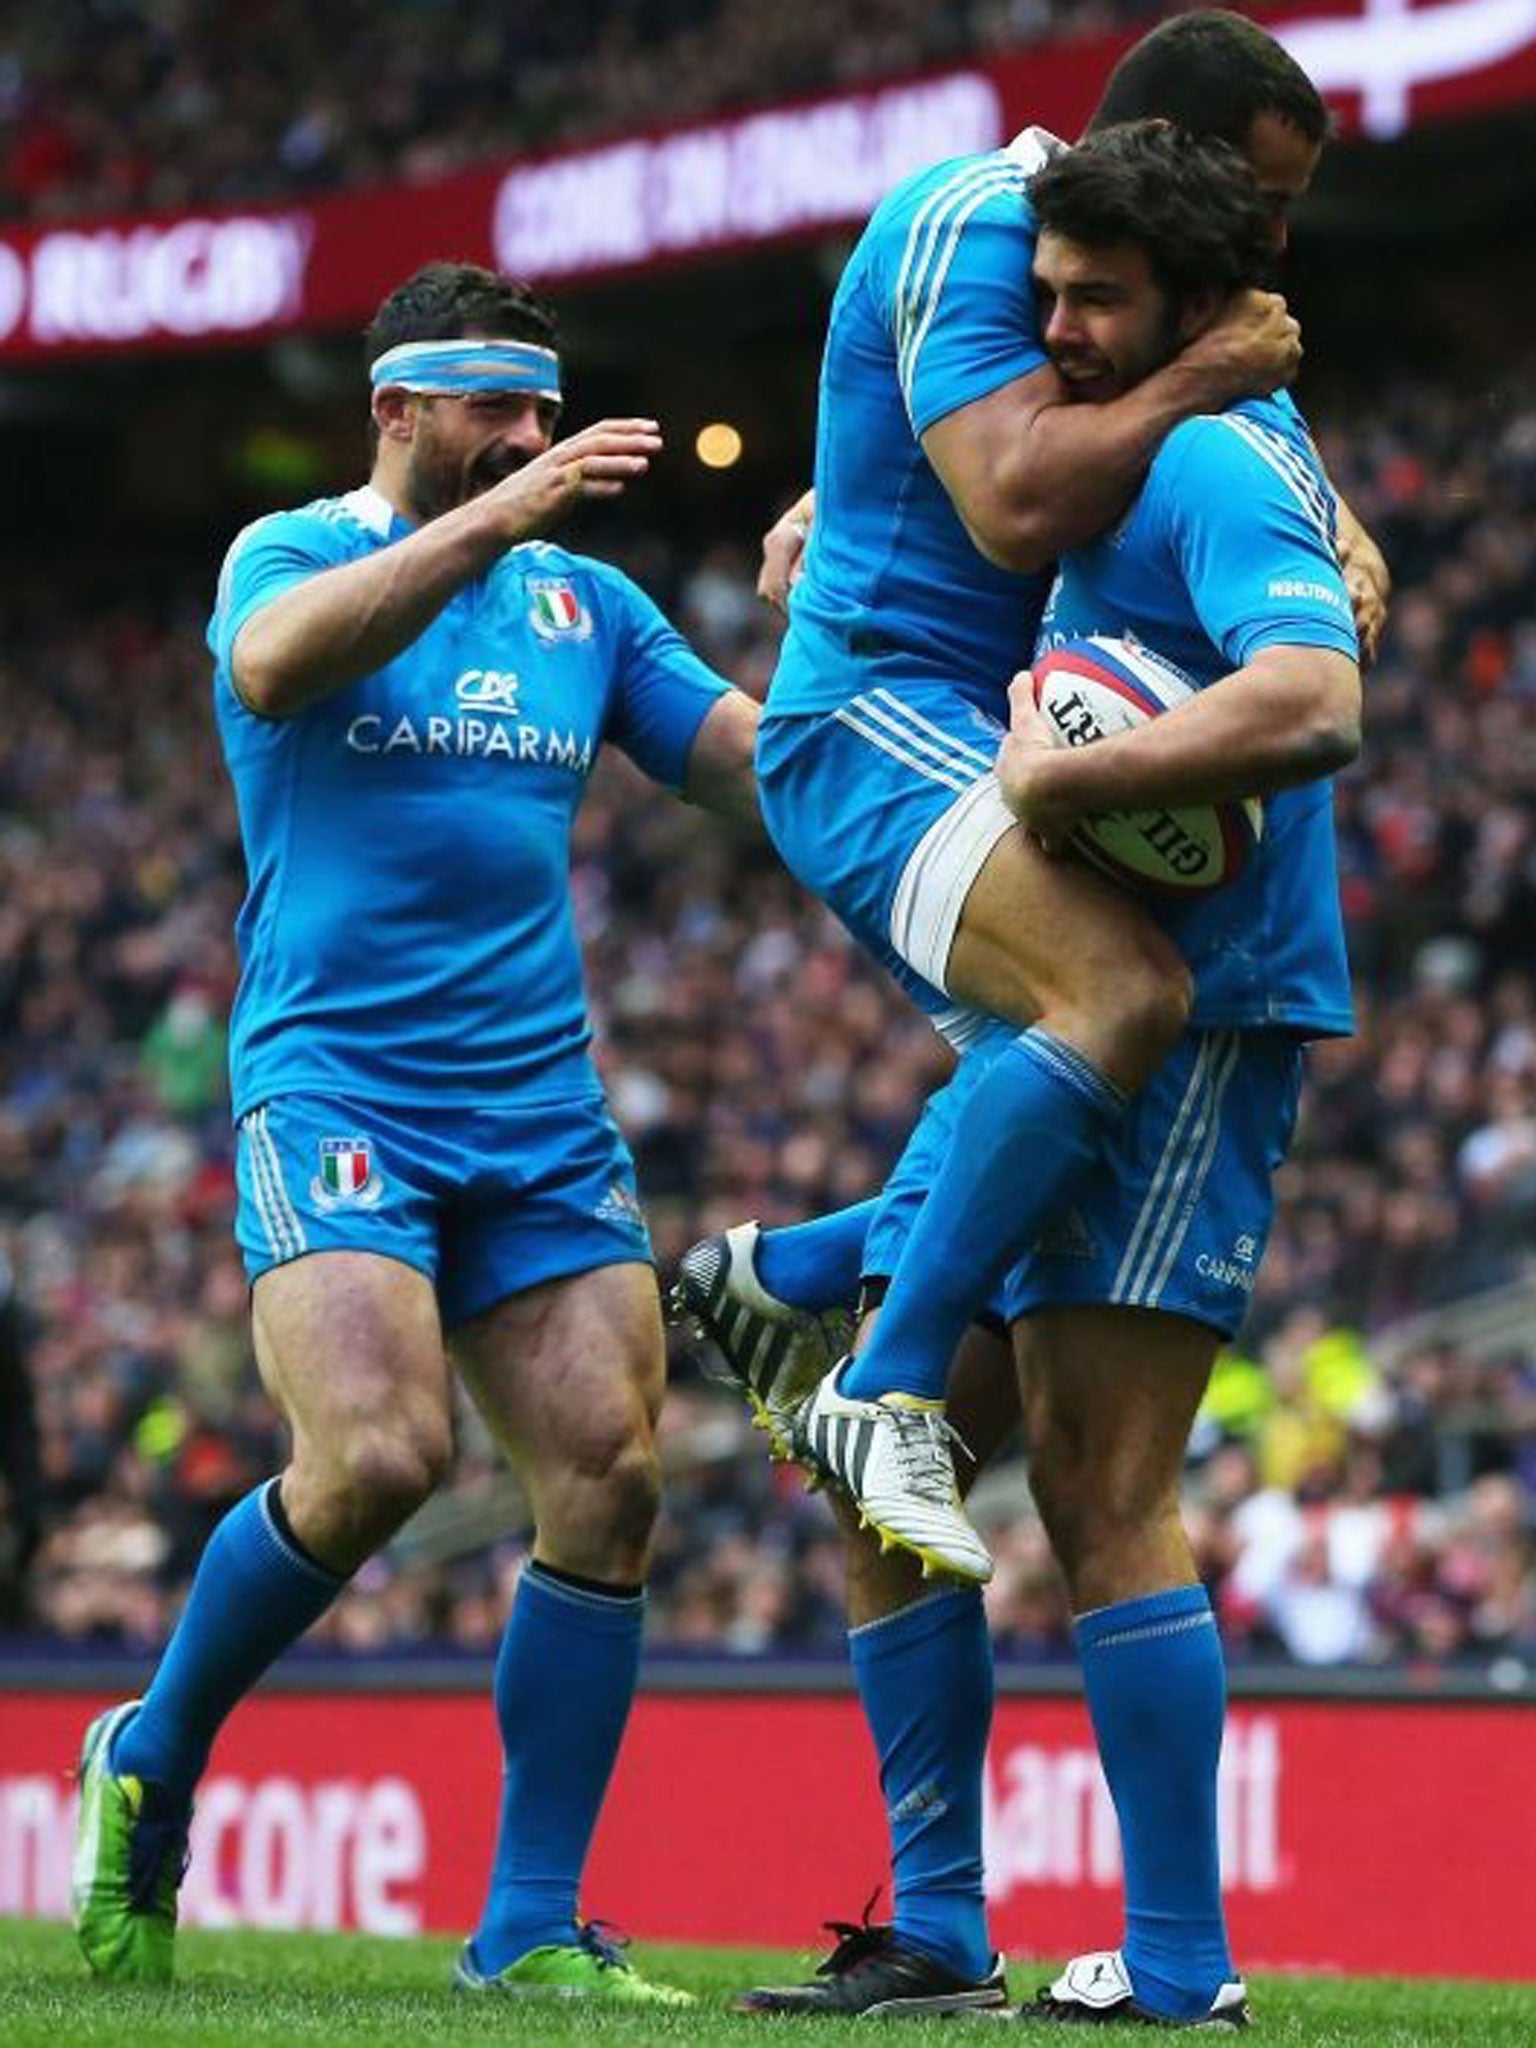 Tom McLean (far right) celebrates his try with Italy team-mates